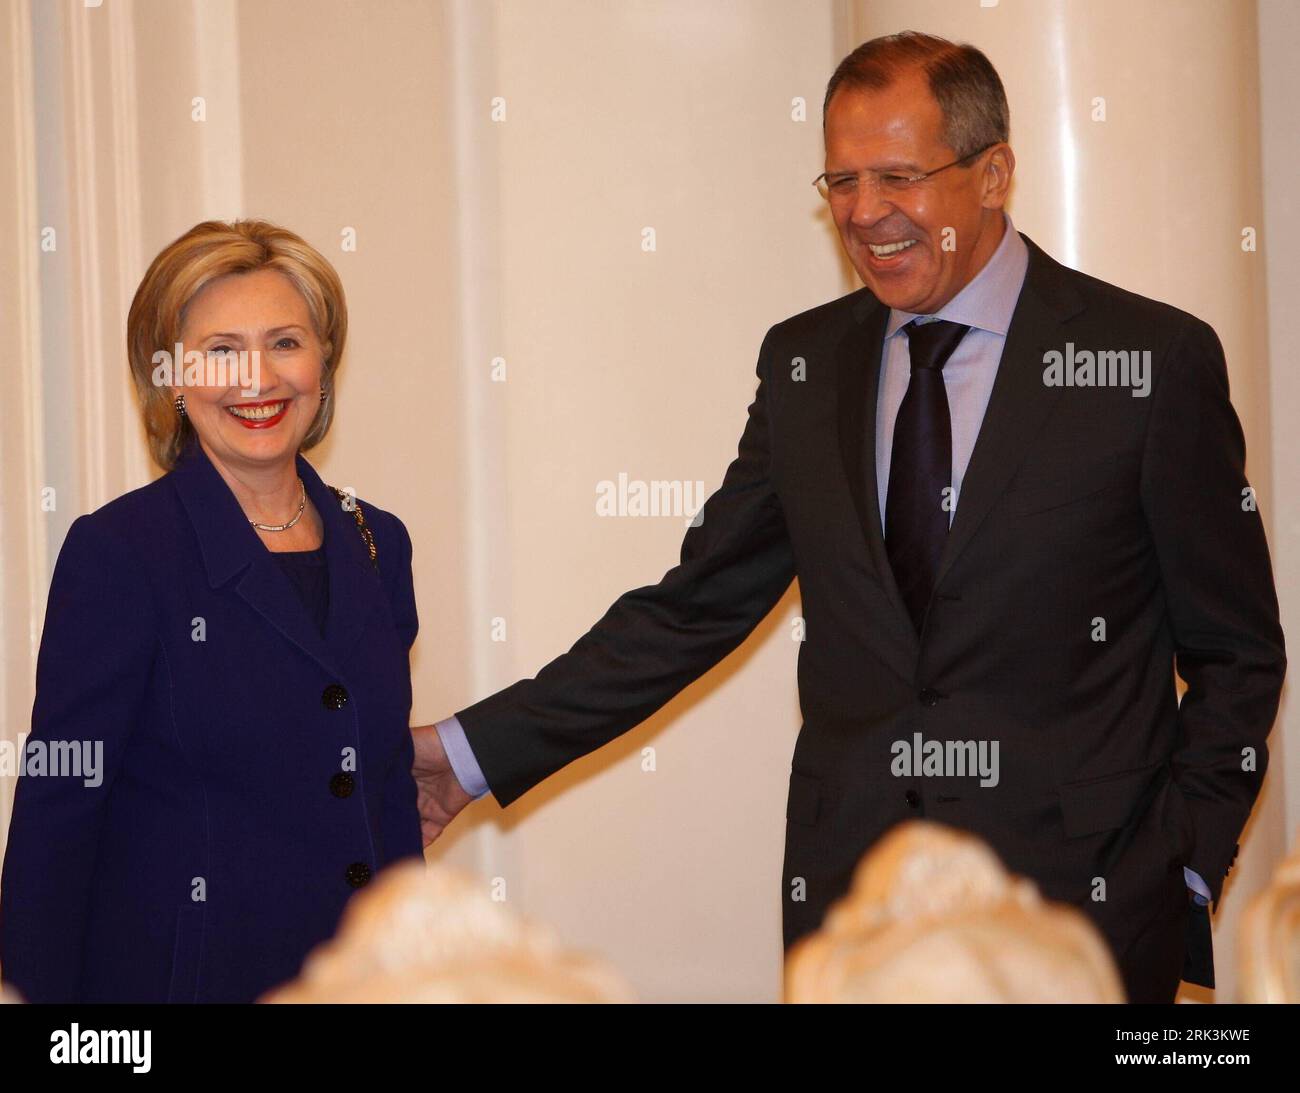 Bildnummer: 53527859  Datum: 13.10.2009  Copyright: imago/Xinhua (091013) -- MOSCOW, Oct. 13, (Xinhua) -- U.S. Secretary of State Hillary Clinton (L), meets with Russian Foreign Minister Sergei Lavrov in Moscow, capital of Russia, on Oct, 13, 2009. Russian Foreign Minister Sergei Lavrov said on Tuesday that Russia and the United States have made considerable progress on a new nuclear arms reduction treaty. (Xinhua/Lu Jinbo) (jl) (6)RUSSIA-U.S.-POLITICS PUBLICATIONxNOTxINxCHN People Politik kbdig xsk 2009 quer premiumd o0 optimistisch    Bildnummer 53527859 Date 13 10 2009 Copyright Imago XINHU Stock Photo